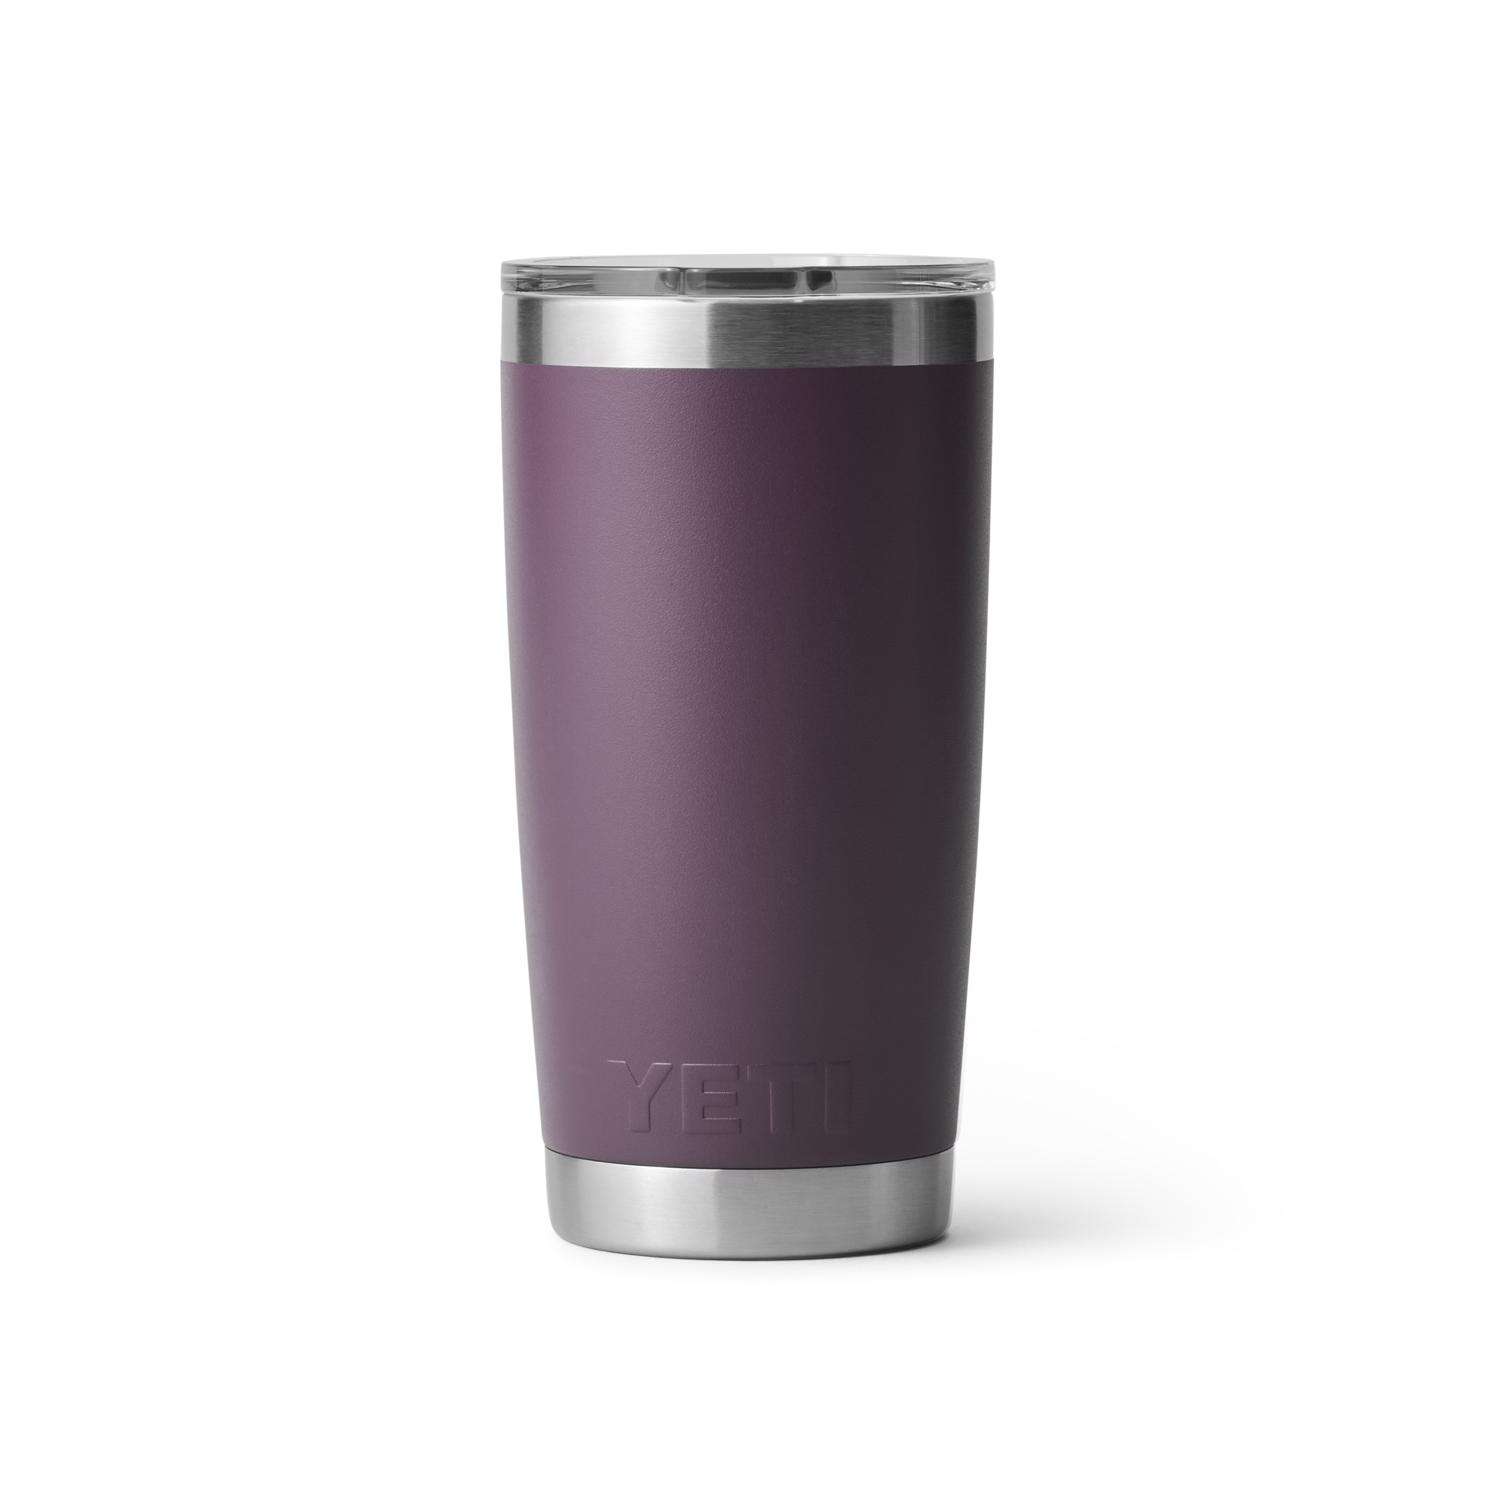 Yeti Rambler 20 Oz. Silver Stainless Steel Insulated Tumbler - Groom &  Sons' Hardware